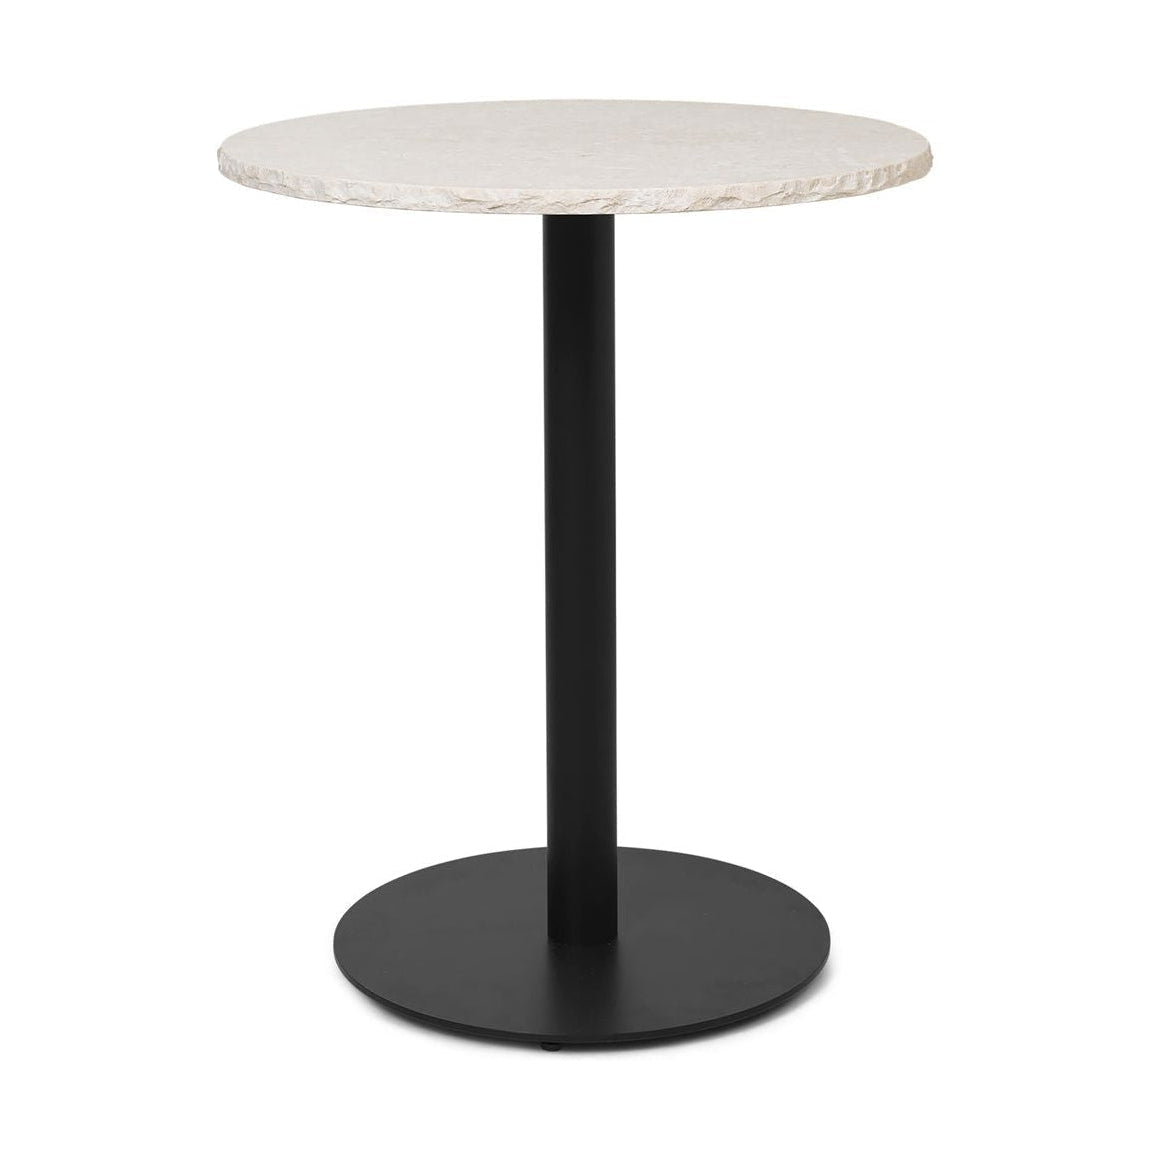 Ferm Living Mineral Cafe Table, Bianco Curia